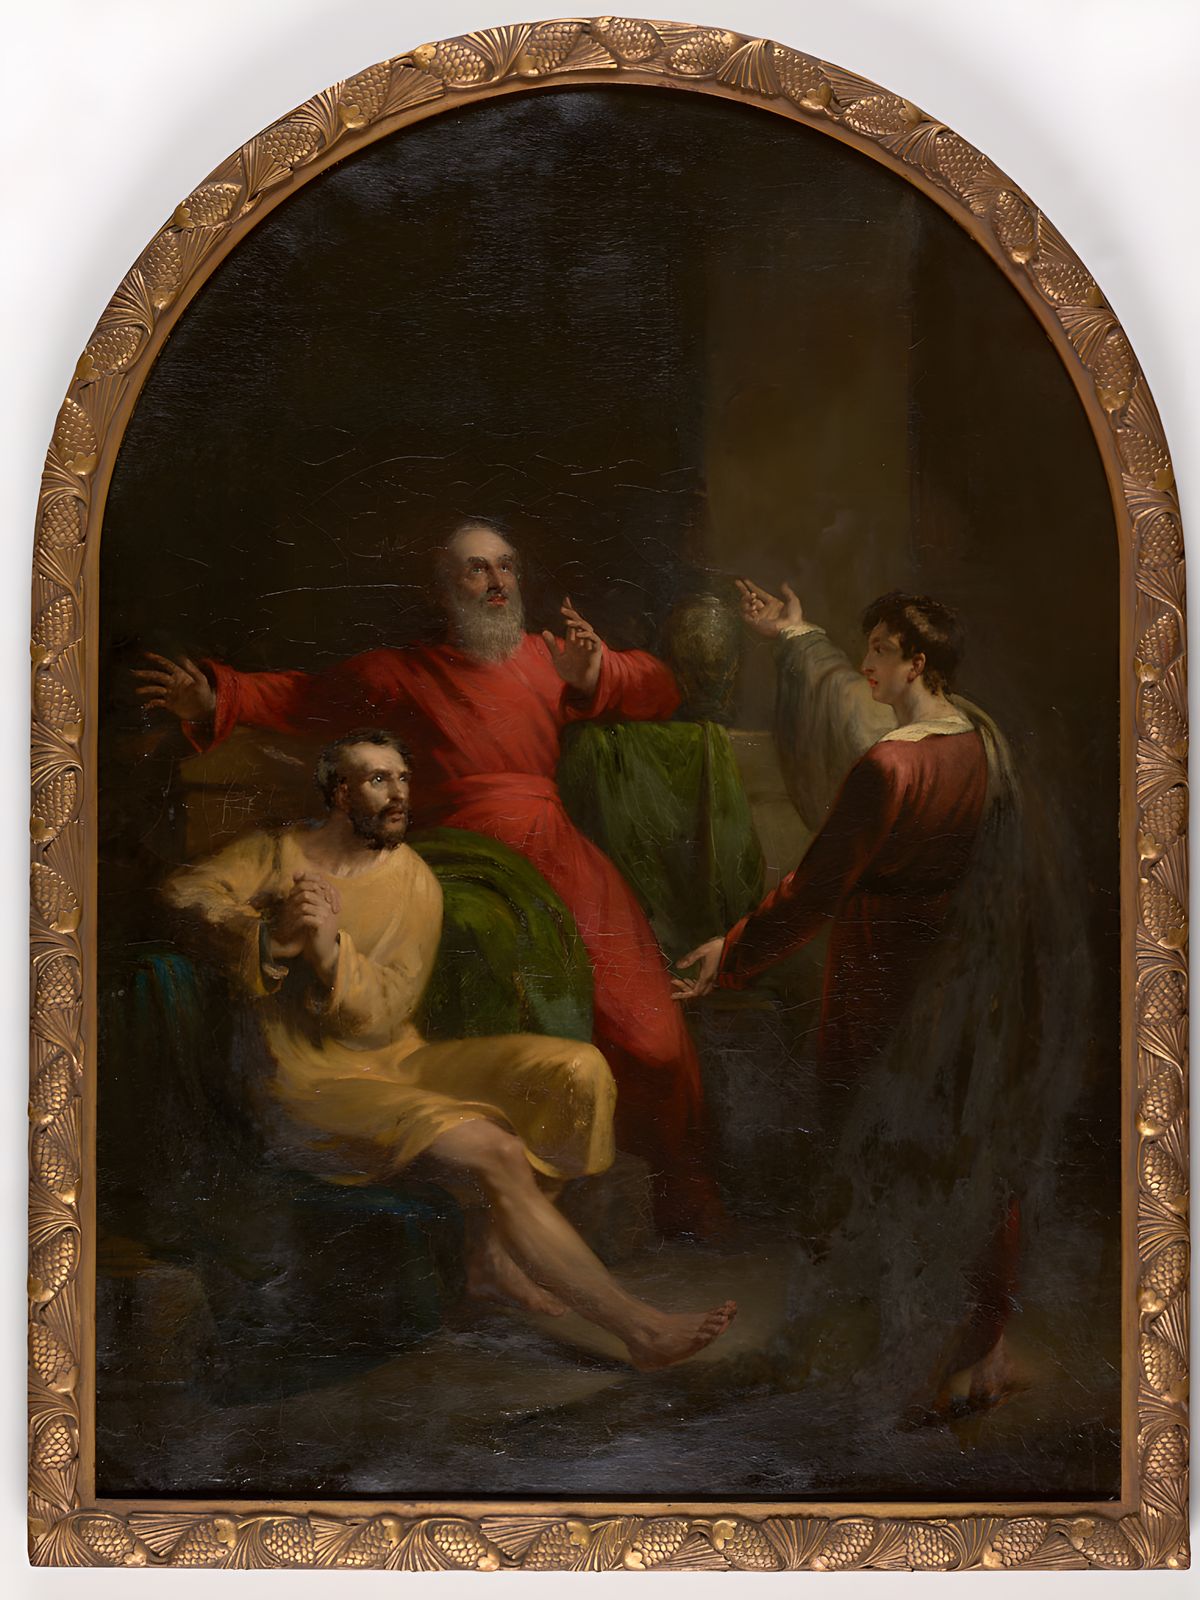 Joseph Telling the Dreams of the Butler and the Baker (1800s) by John Wood - Public Domain Bible Painting